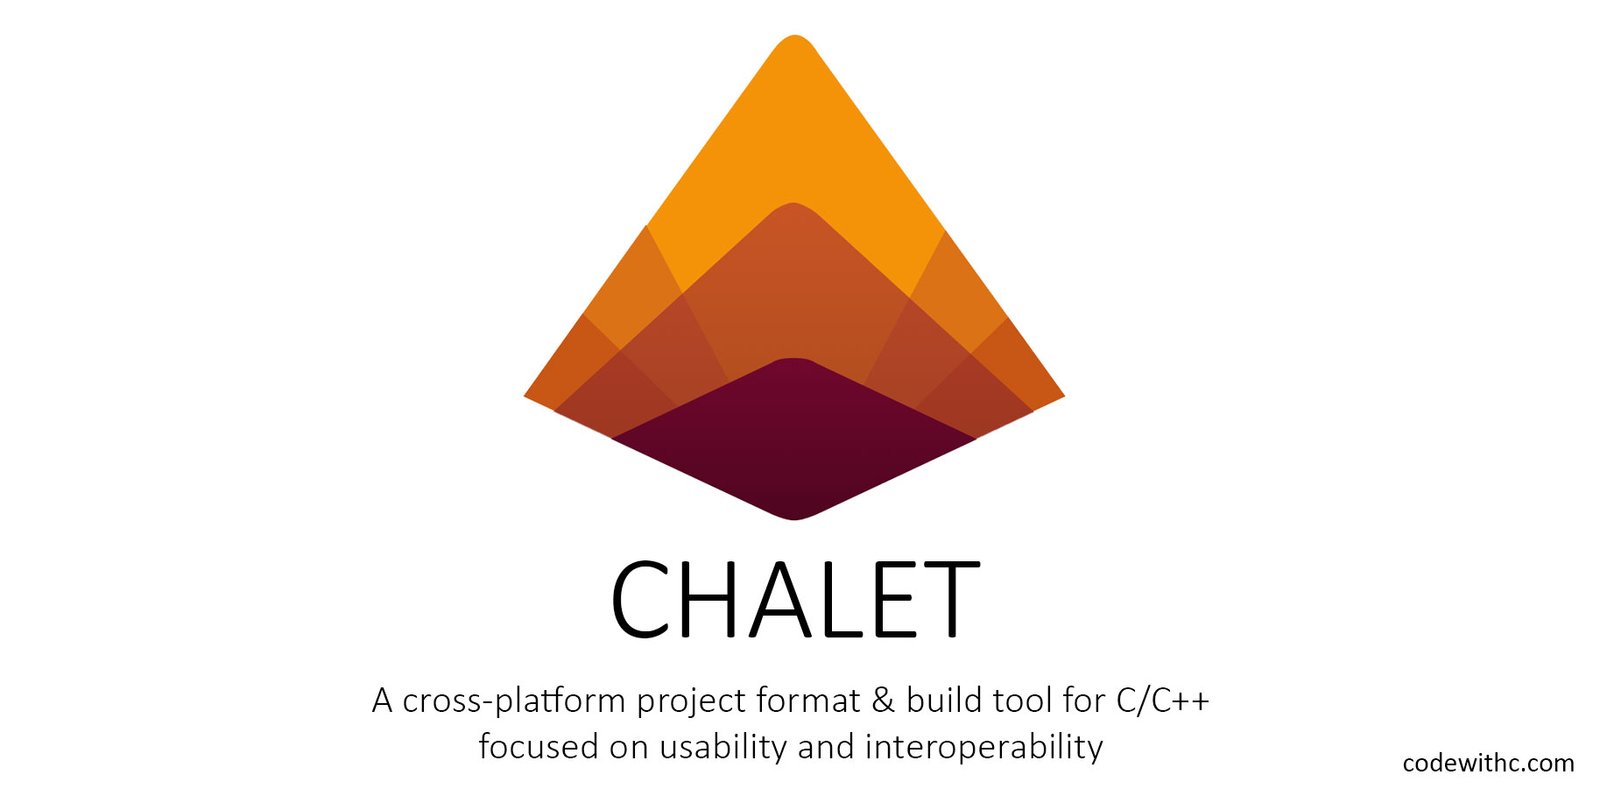 Chalet: An open-source, cross-platform C/C++ project format and build tool